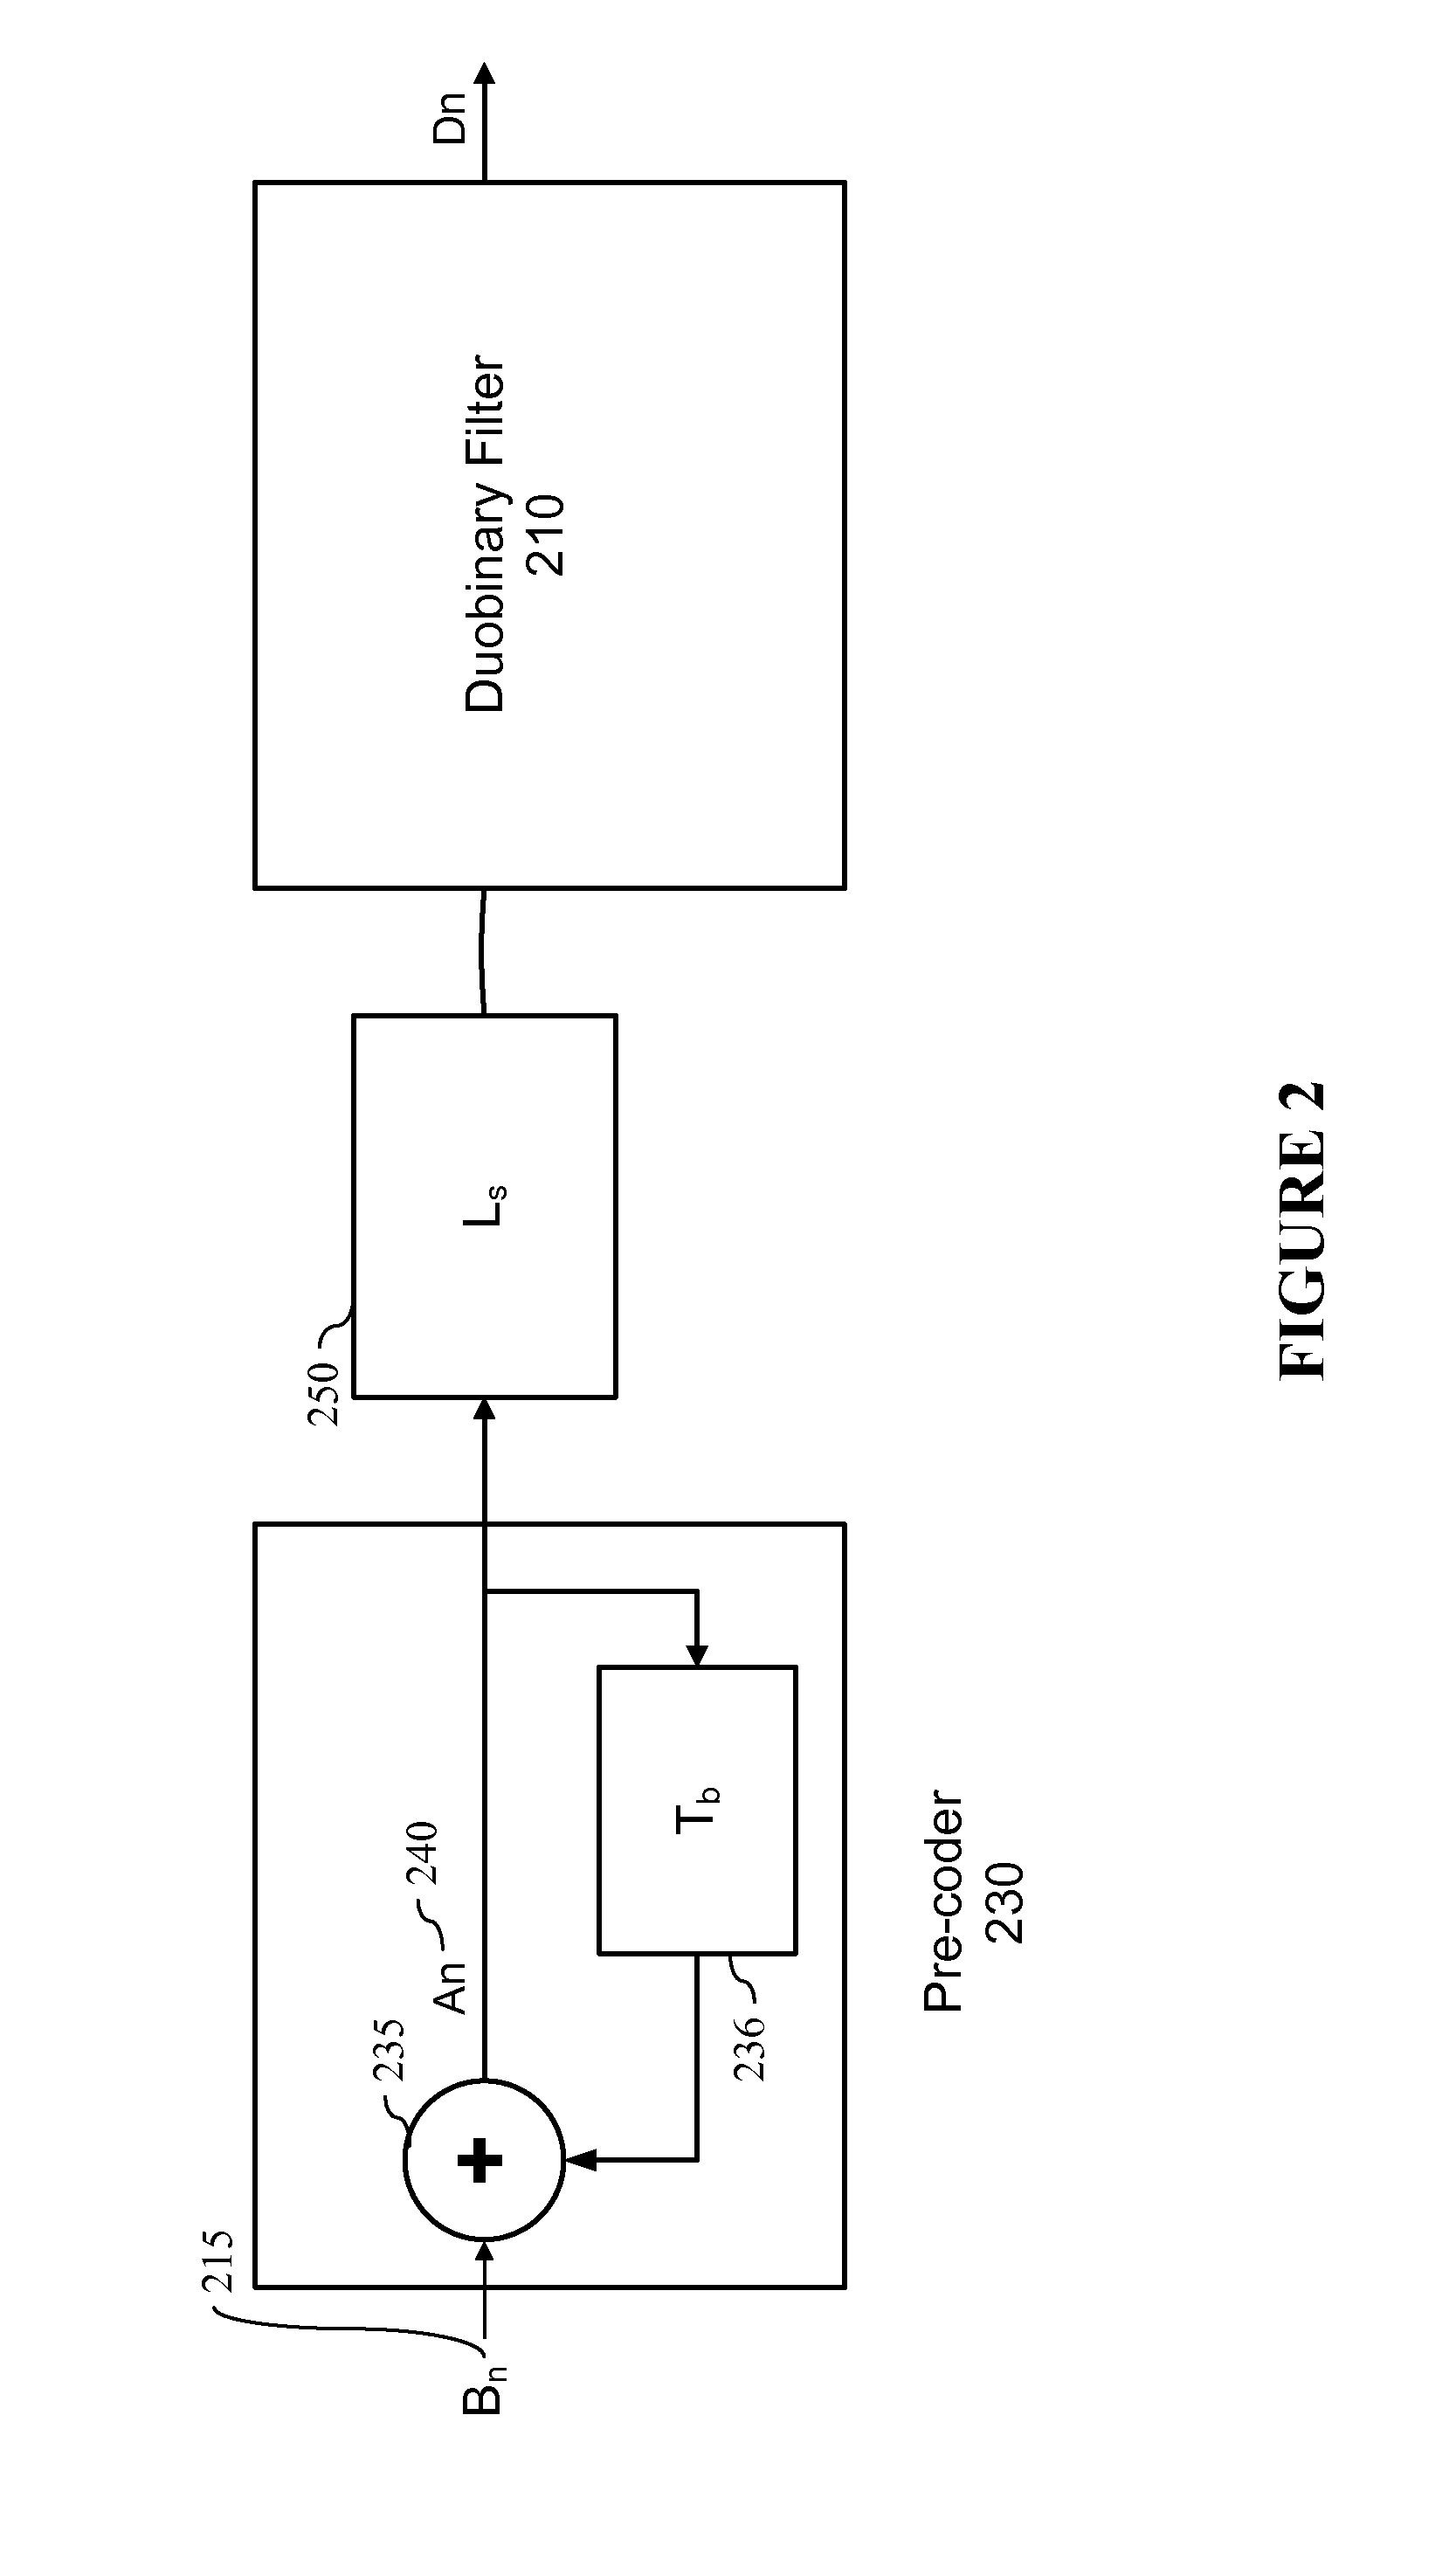 Optical shaping for amplification in a semiconductor optical amplifier